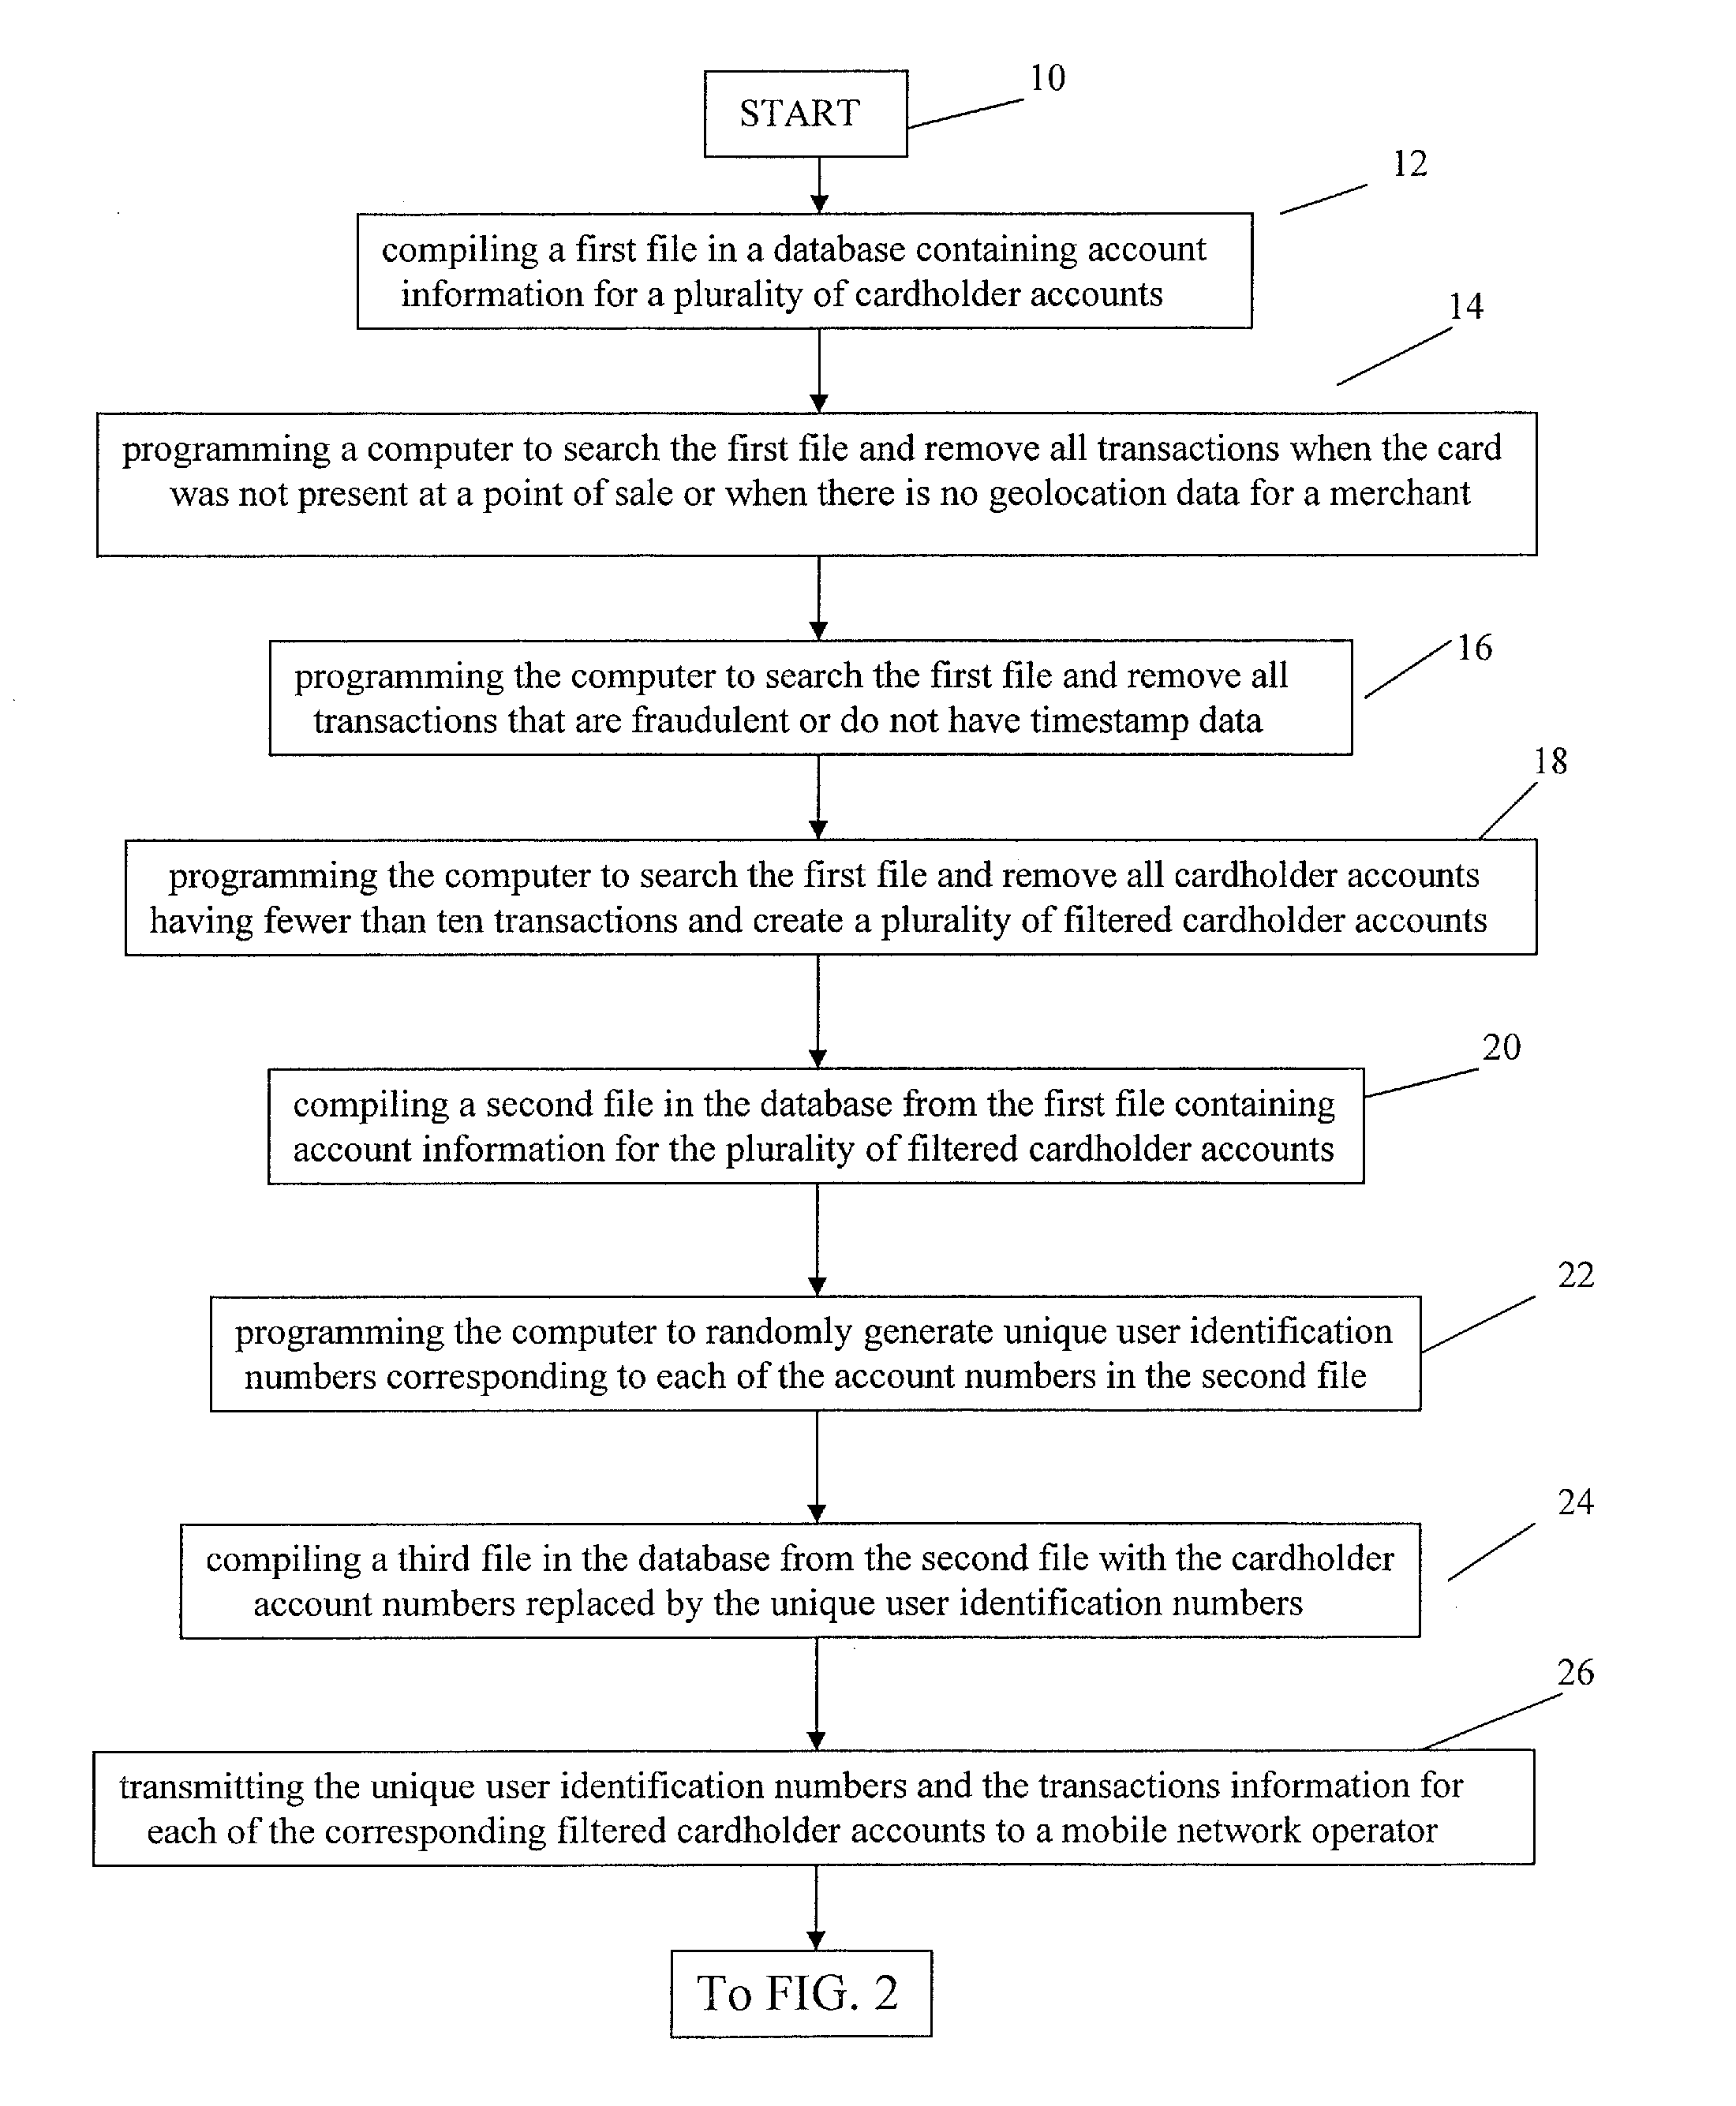 Method for Providing Payment Card Security Using Registrationless Telecom Geolocation Capture